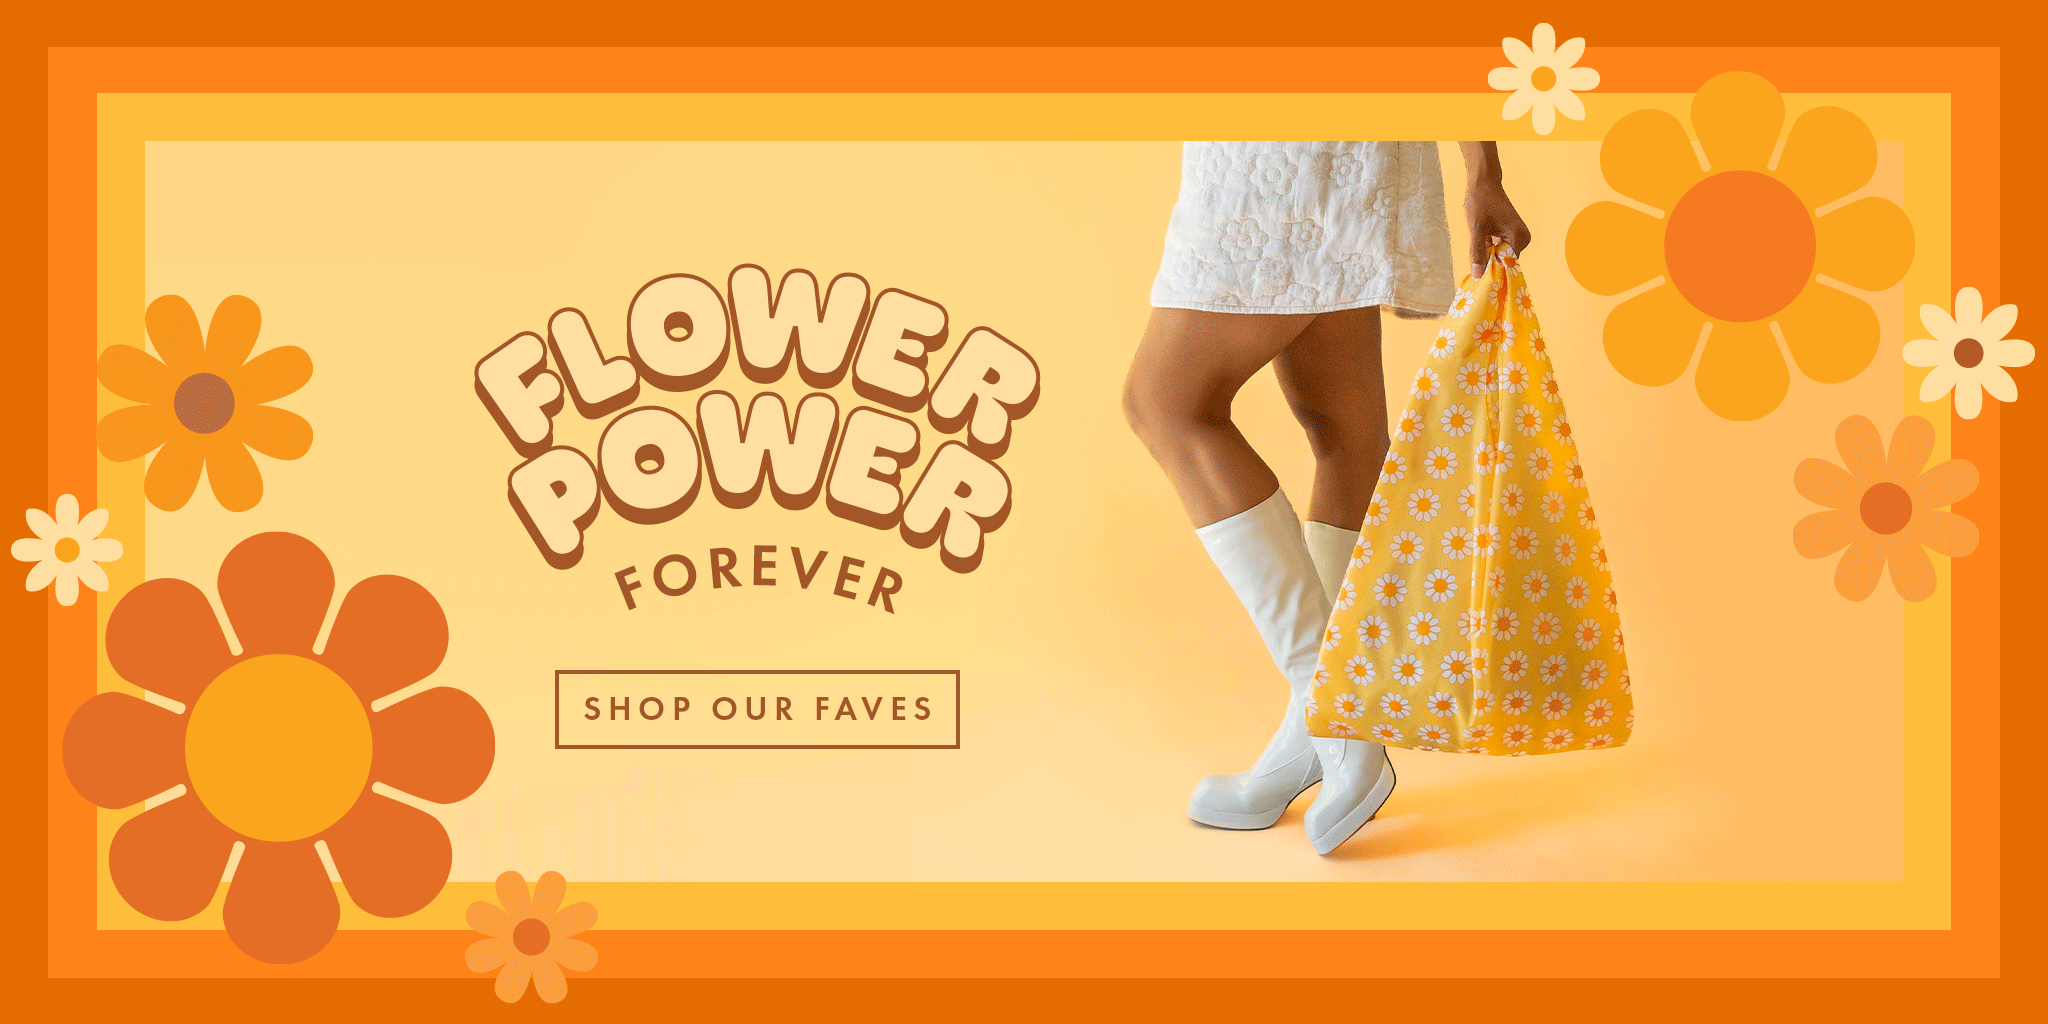 Flower Power Forever. Shop our favs